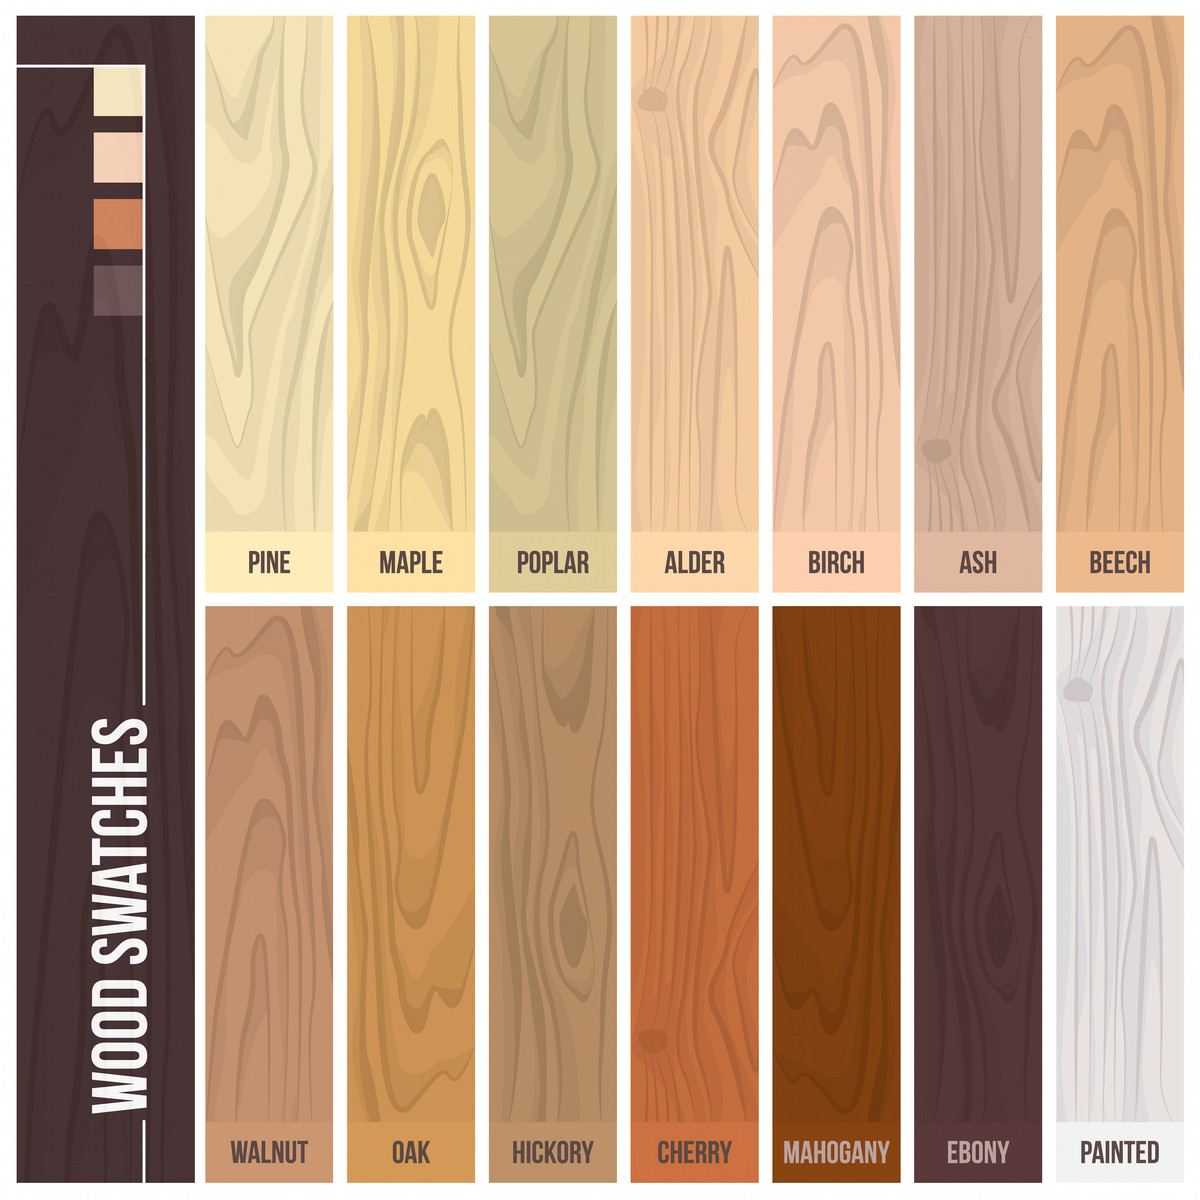 two different color hardwood floors of 12 types of hardwood flooring species styles edging dimensions pertaining to types of hardwood flooring illustrated guide